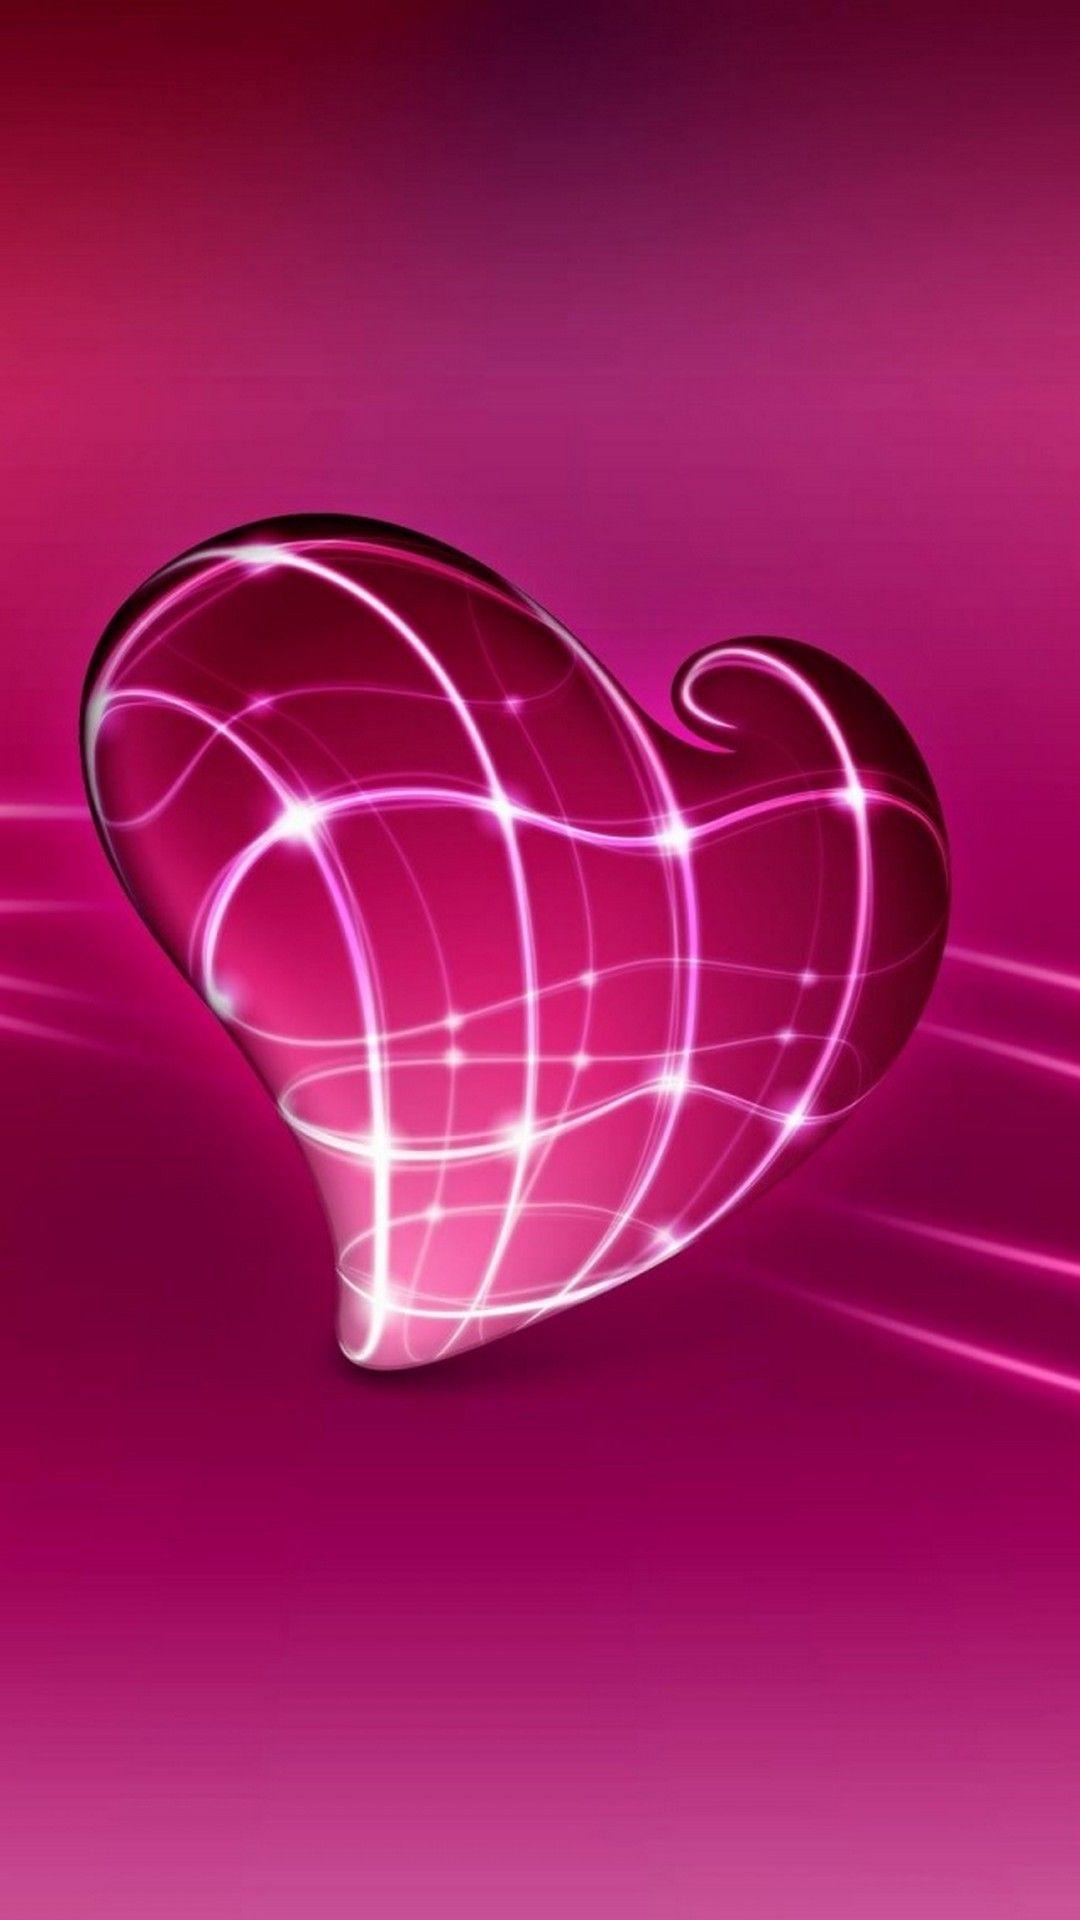 1080x1920 Pink Heart Android Wallpaper 3D - 2019 Android Wallpaper